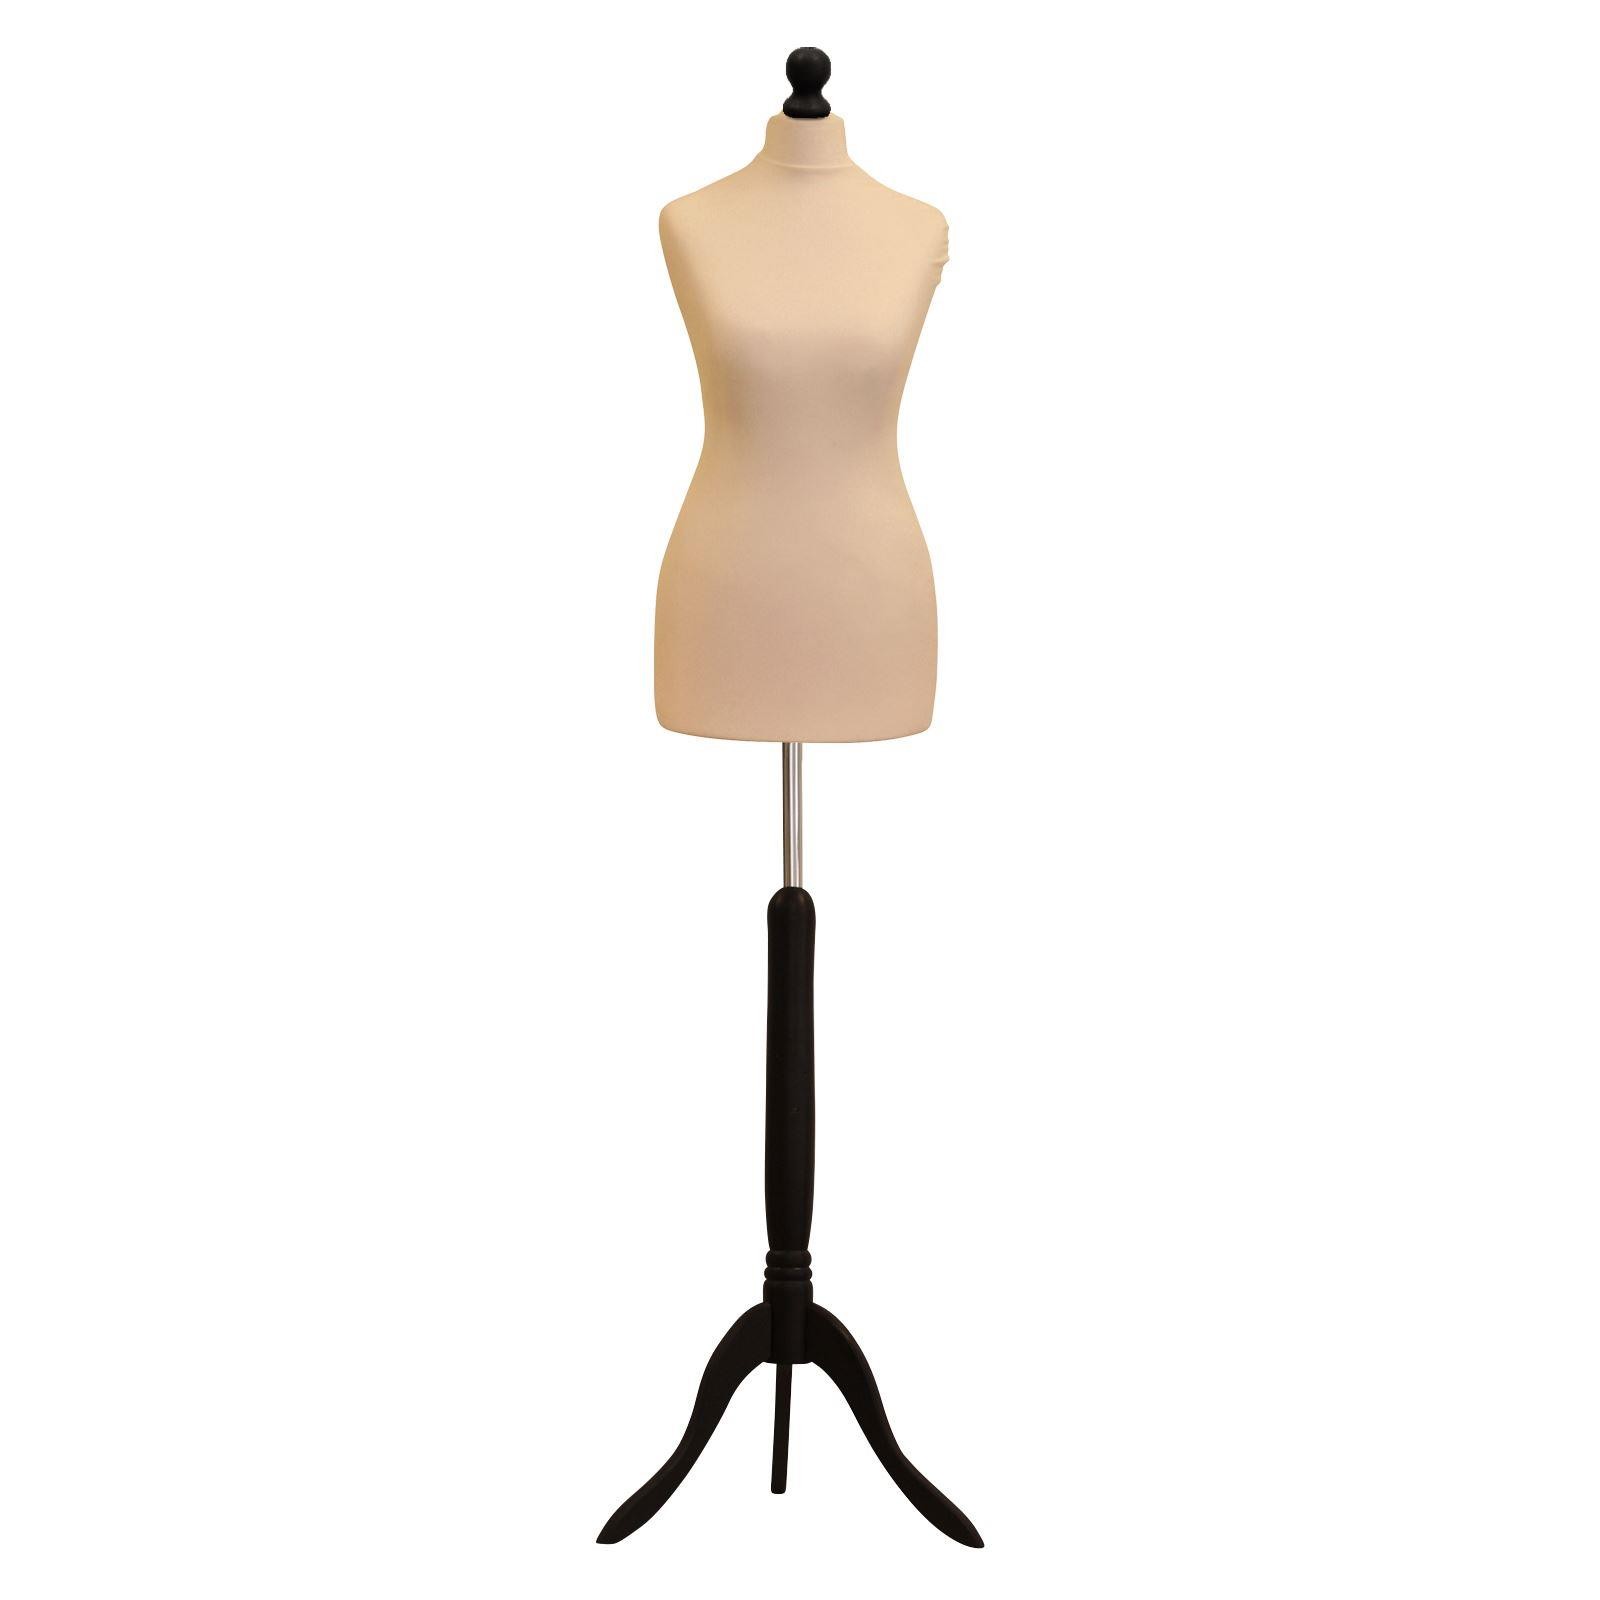 The Shopfitting Shop DELUXE Size 8 Female Dressmakers Dummy Tailors Mannequin Bust CREAM Jersey WHITE WOOD Tripod Stand 